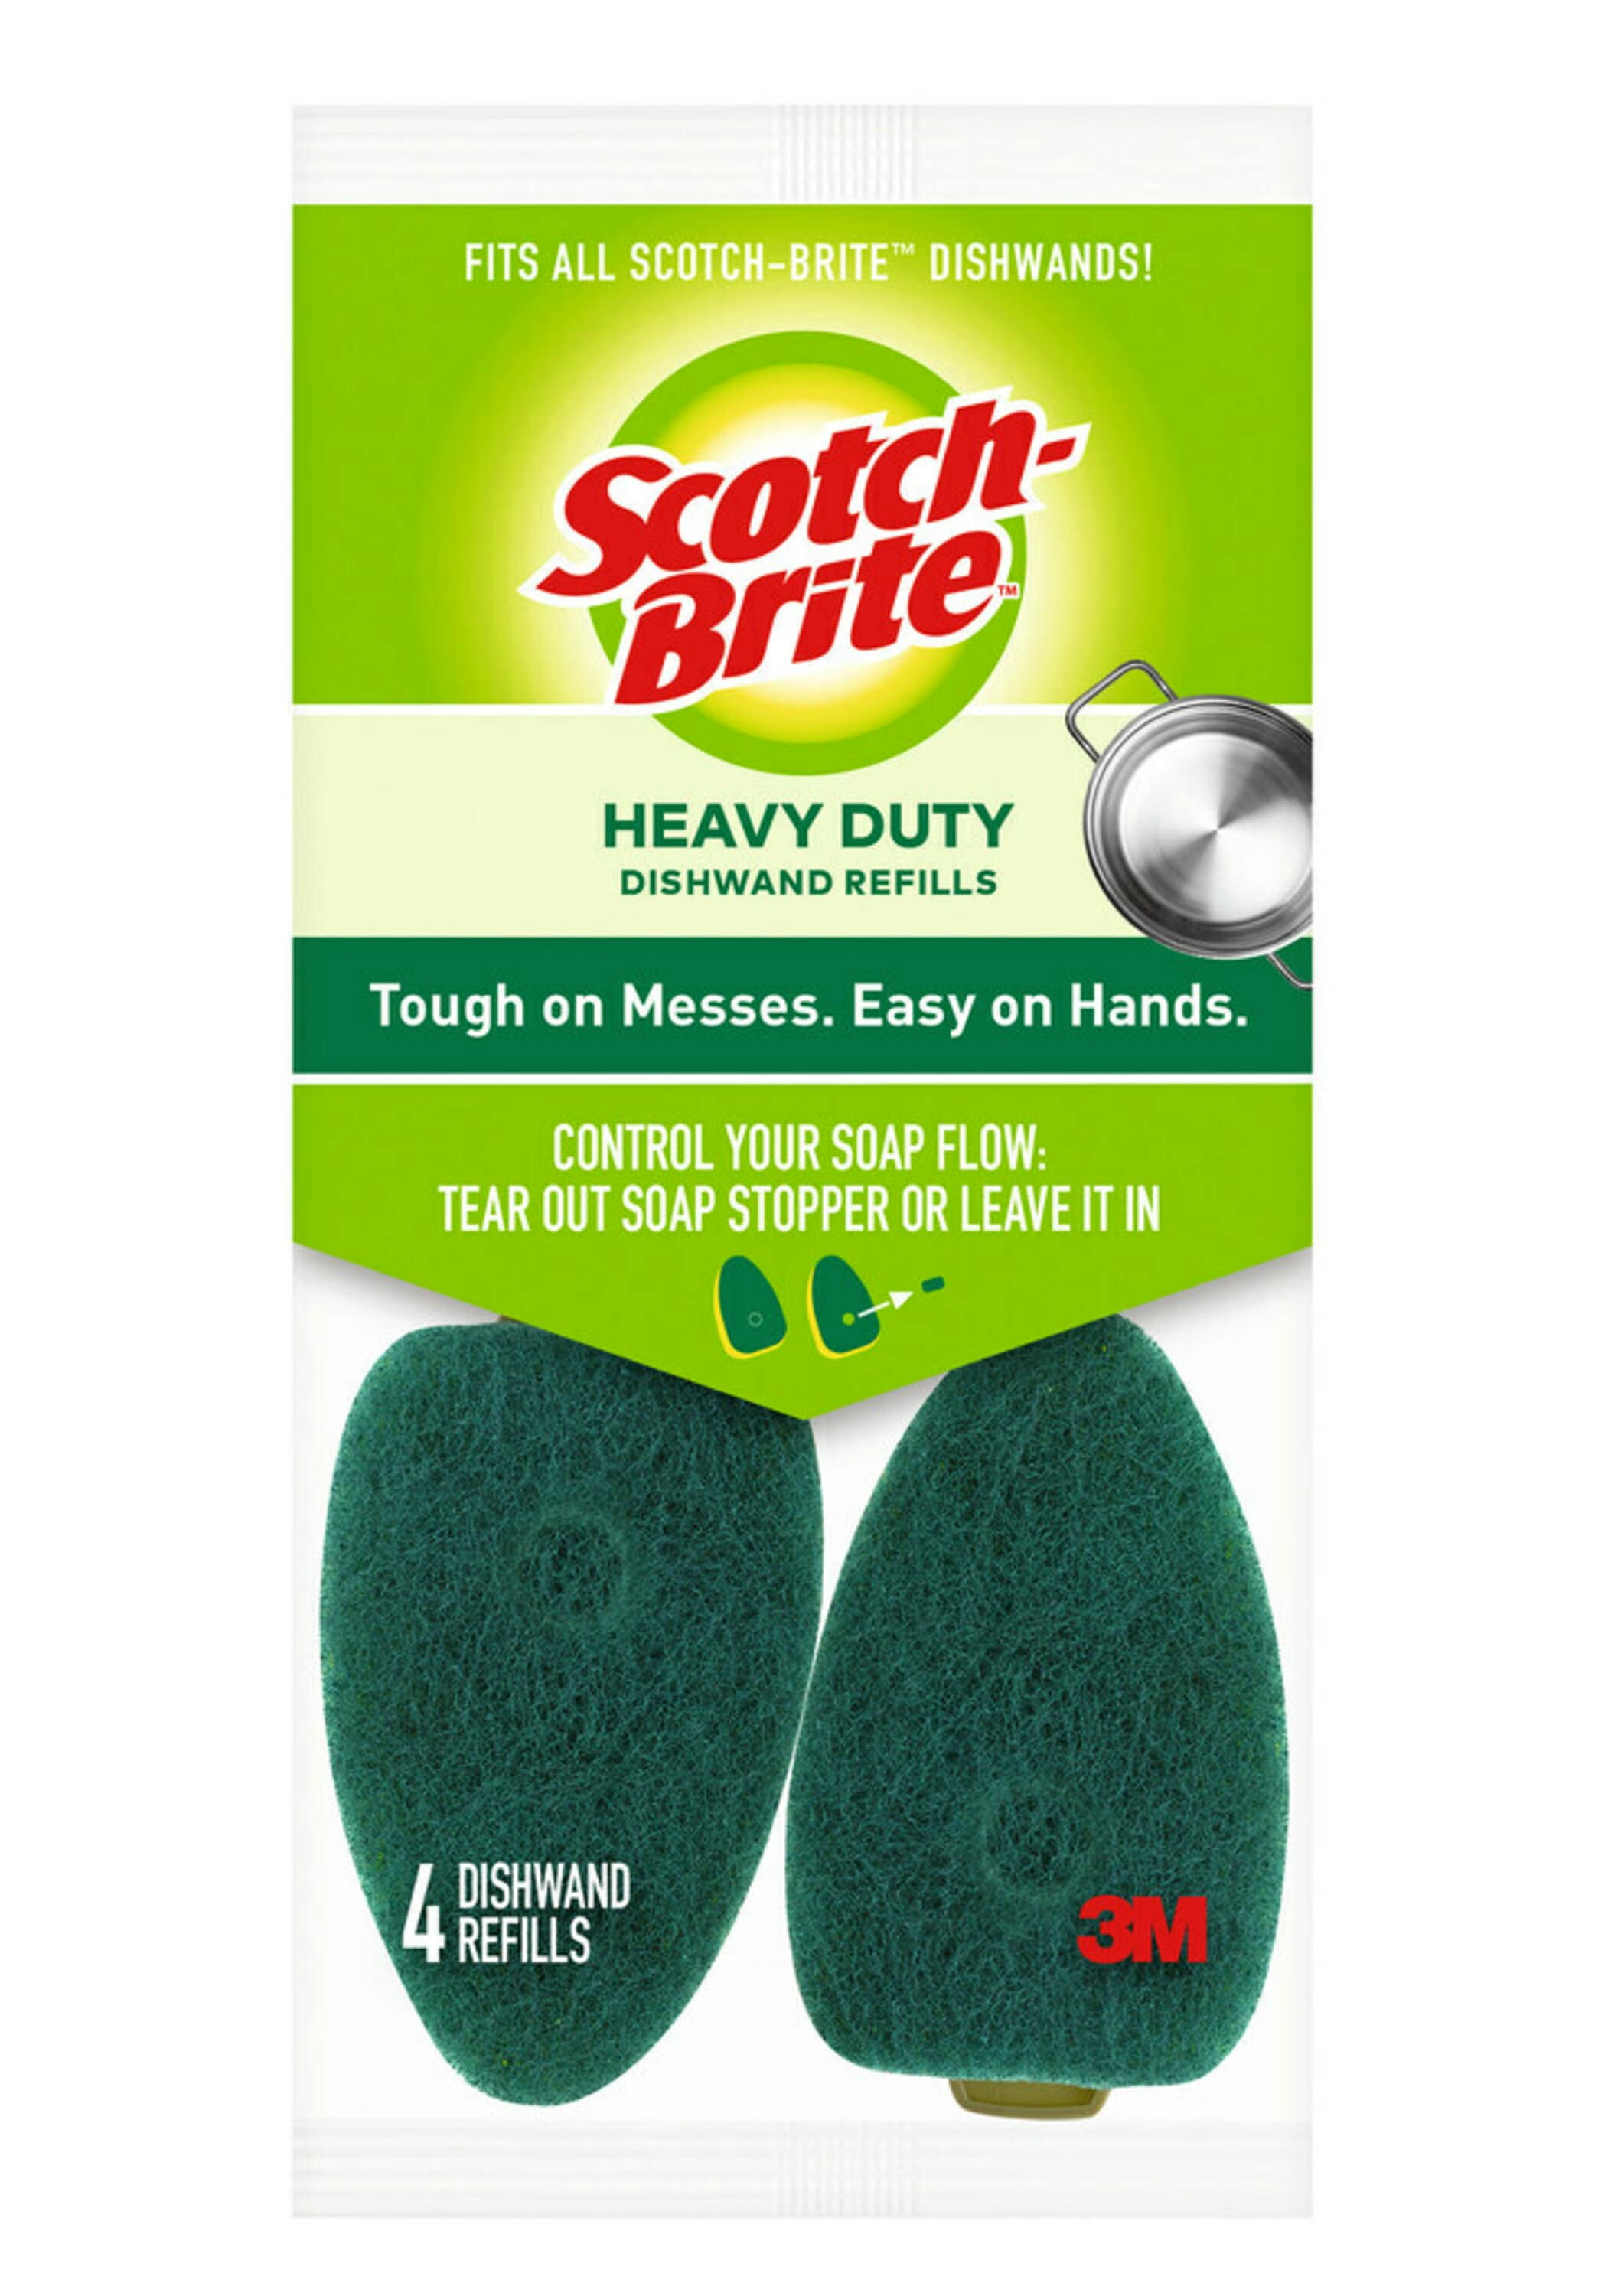 Scotch-Brite™ Heavy Duty Dishwand Refills, 2 pieces in pack